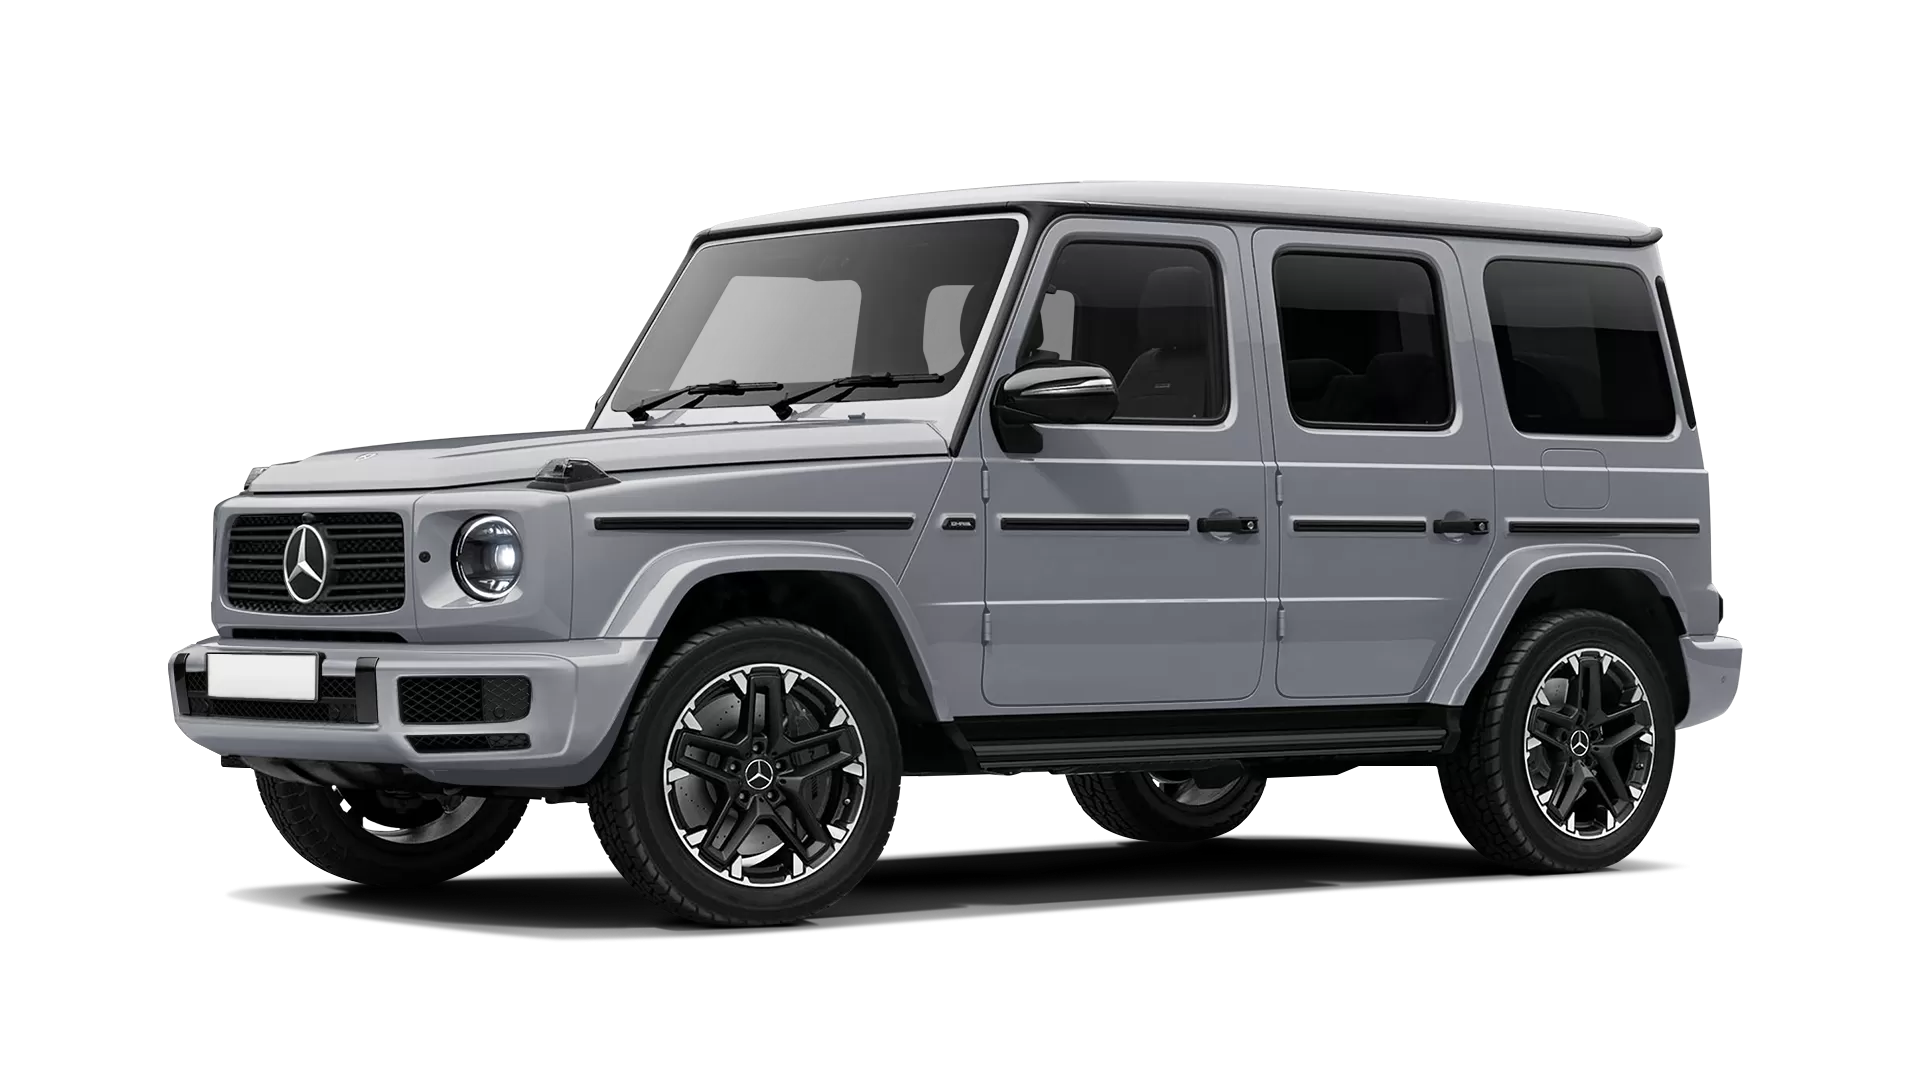 Mercedes G class W463 stock front view in Iridium Silver color